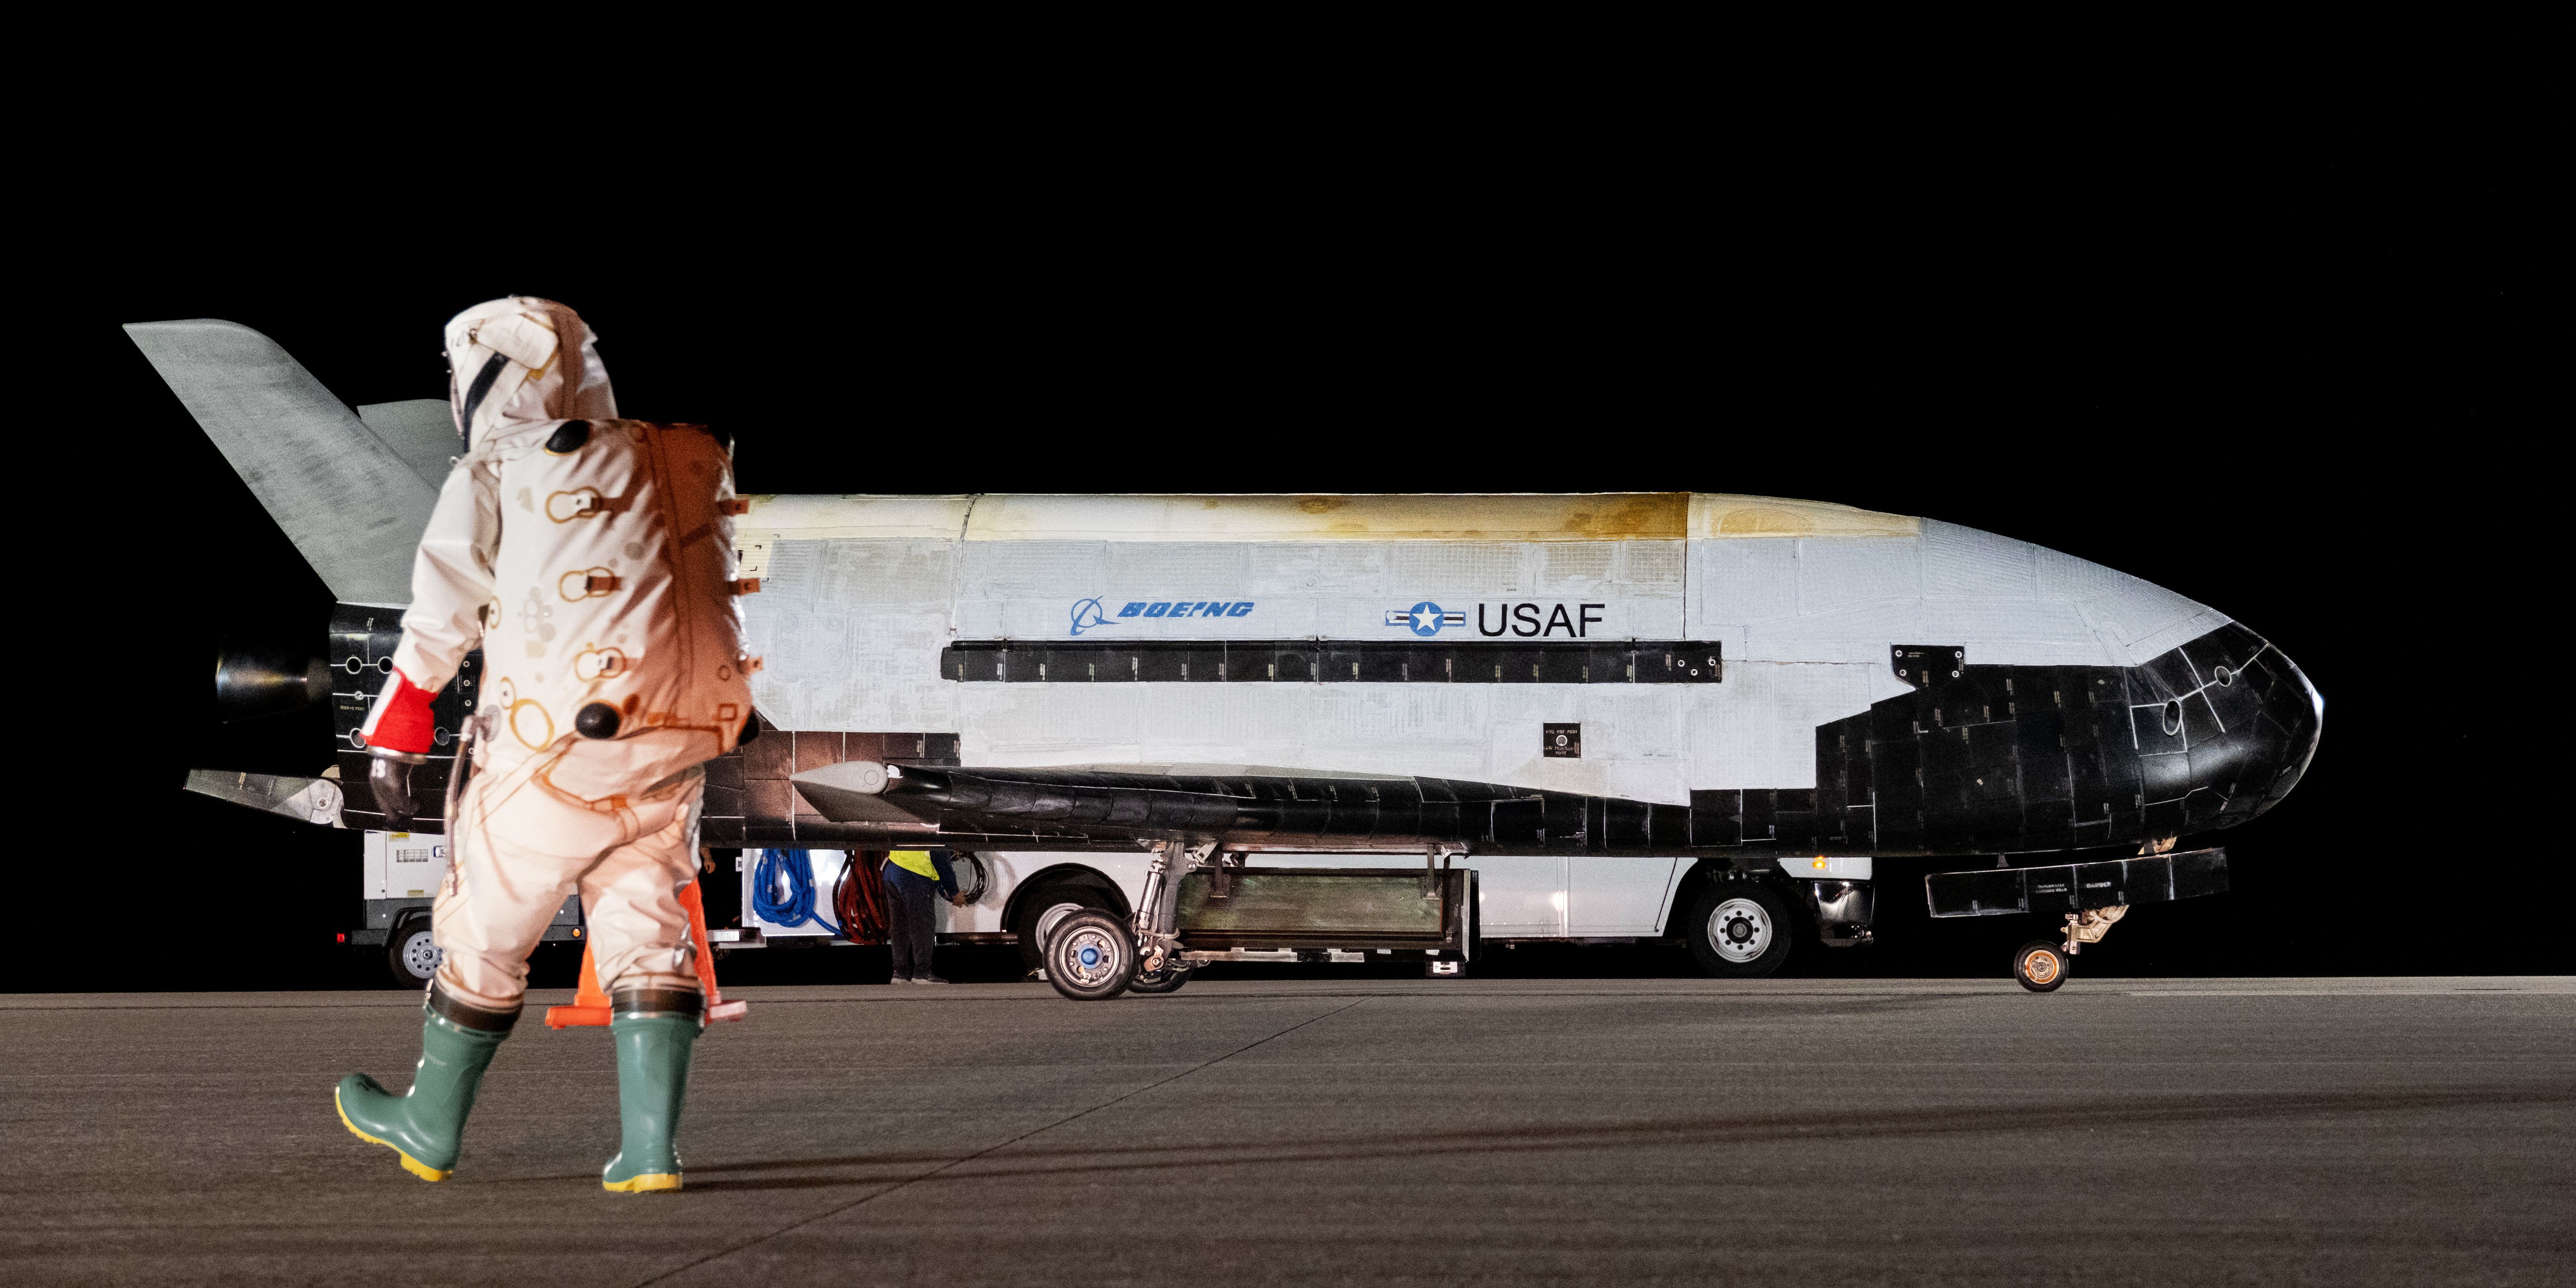 The X-37B spaceplane is pictured on the runway in the background while a person in a white hazmat suit walks past it in the foreground